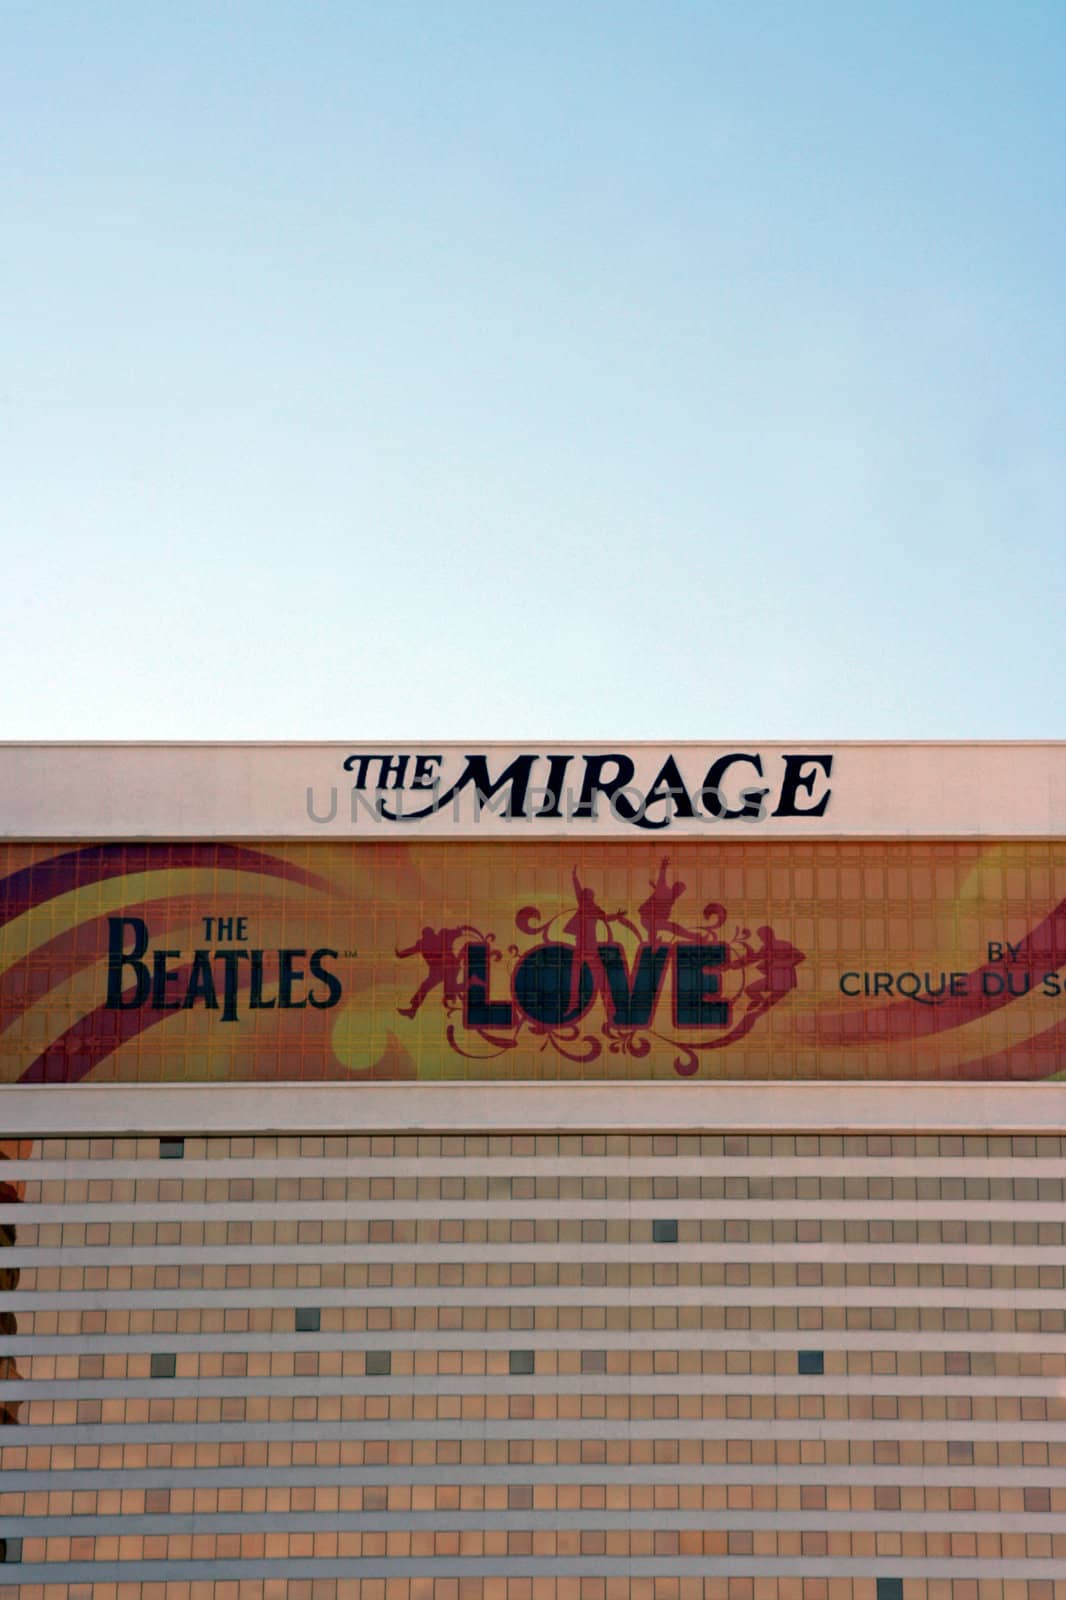 A exterior shot of The Mirage casino and hotel in Las Vegas